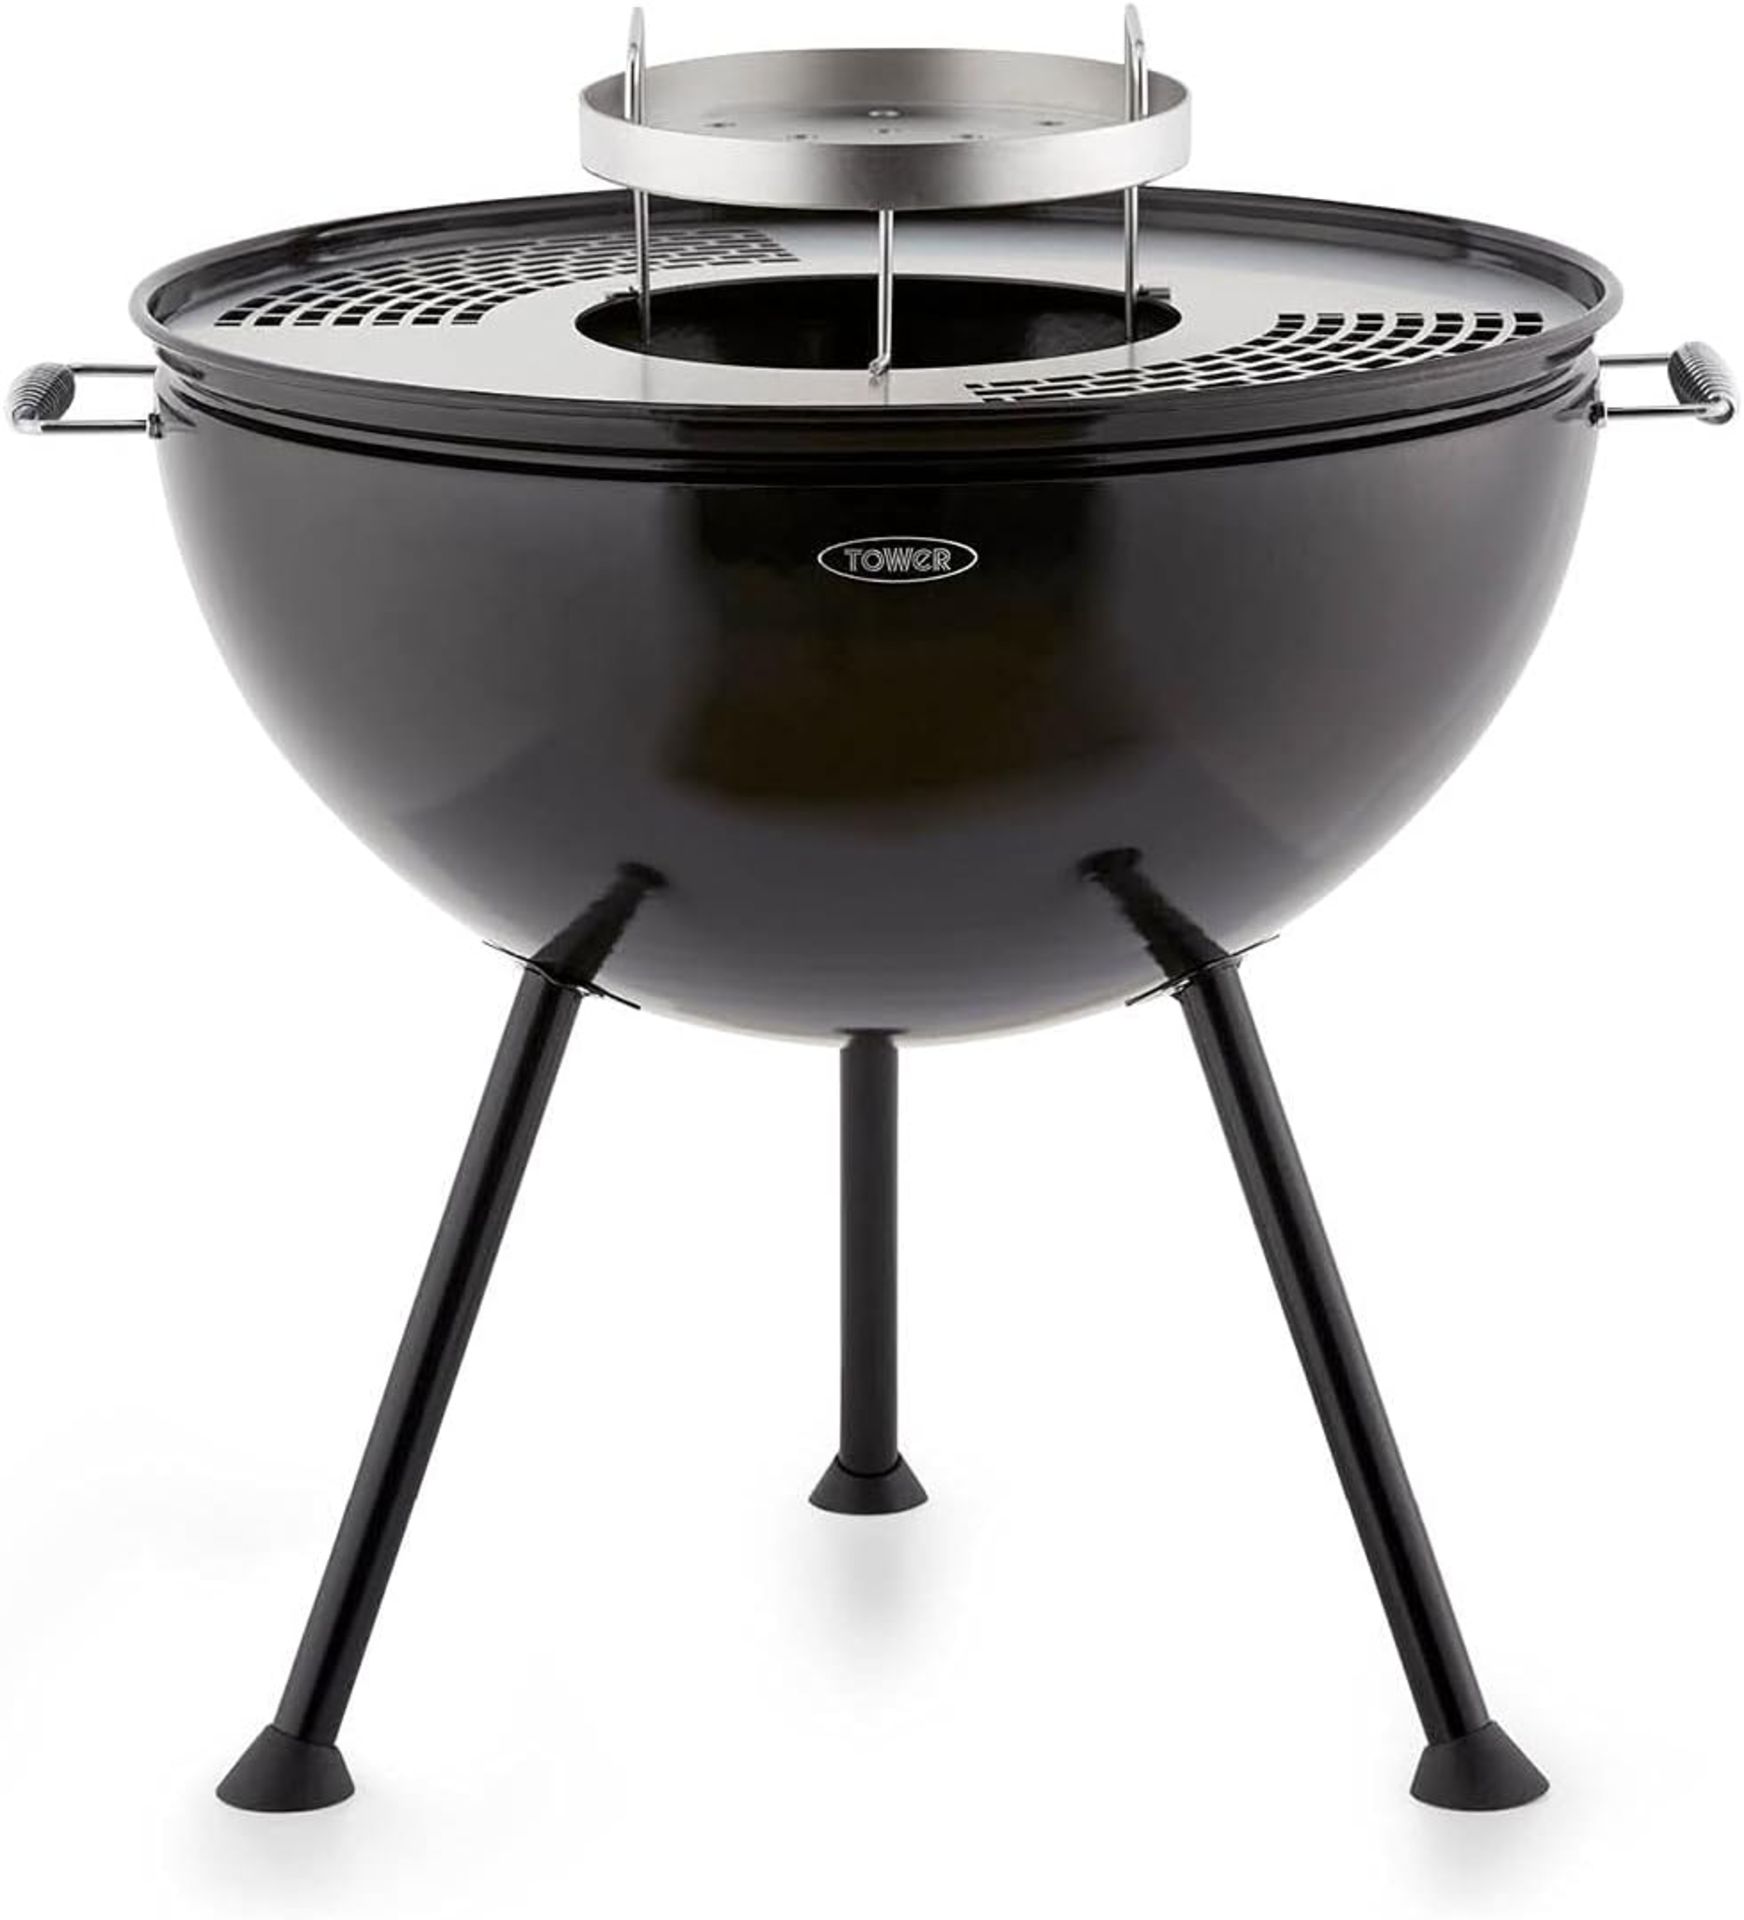 BRAND NEW Tower 2-in-1 Fire Pit and BBQ. RRP £159.99 EACH. Combining visual appeal and